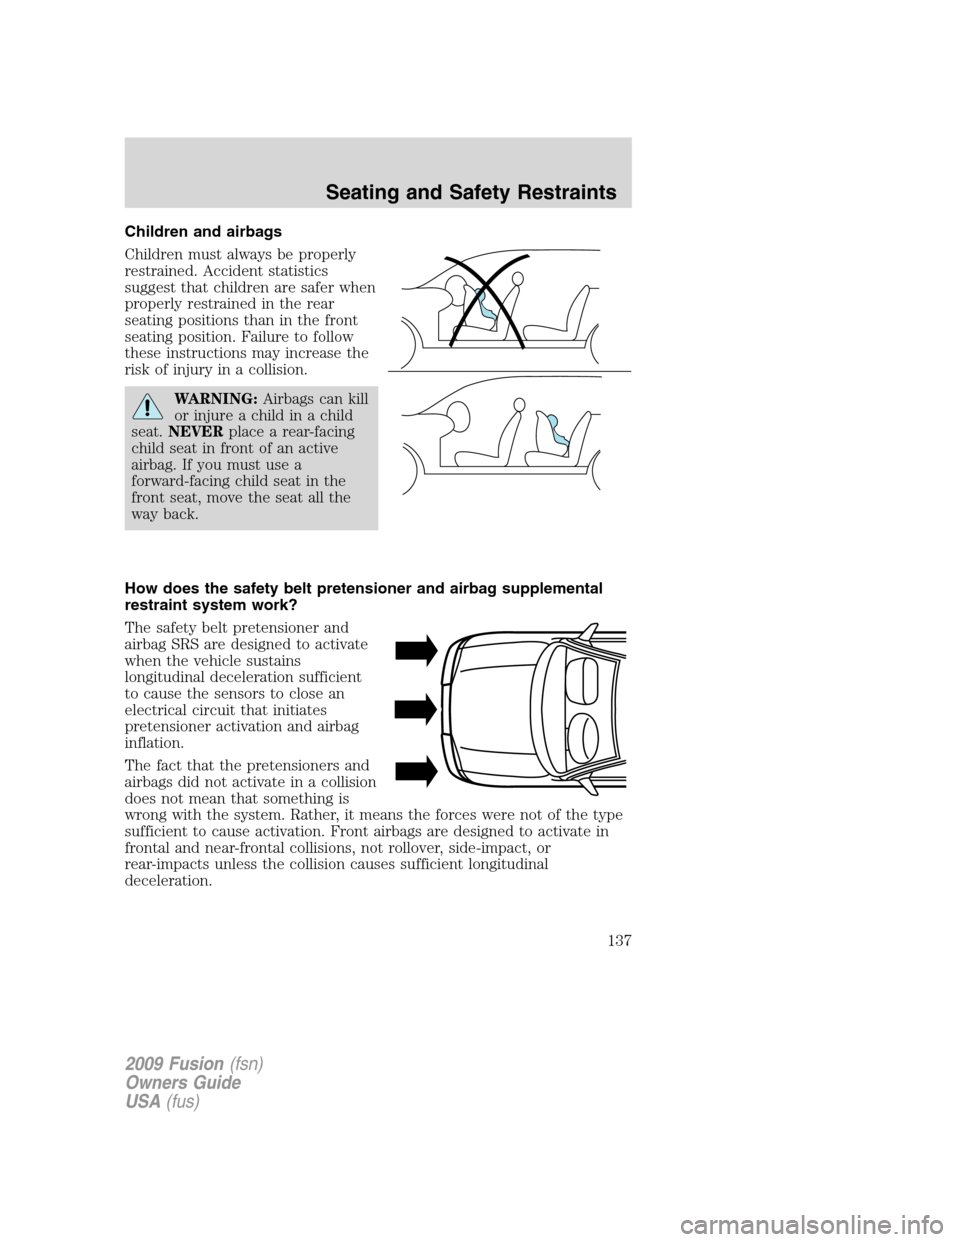 FORD FUSION (AMERICAS) 2009 1.G User Guide Children and airbags
Children must always be properly
restrained. Accident statistics
suggest that children are safer when
properly restrained in the rear
seating positions than in the front
seating p